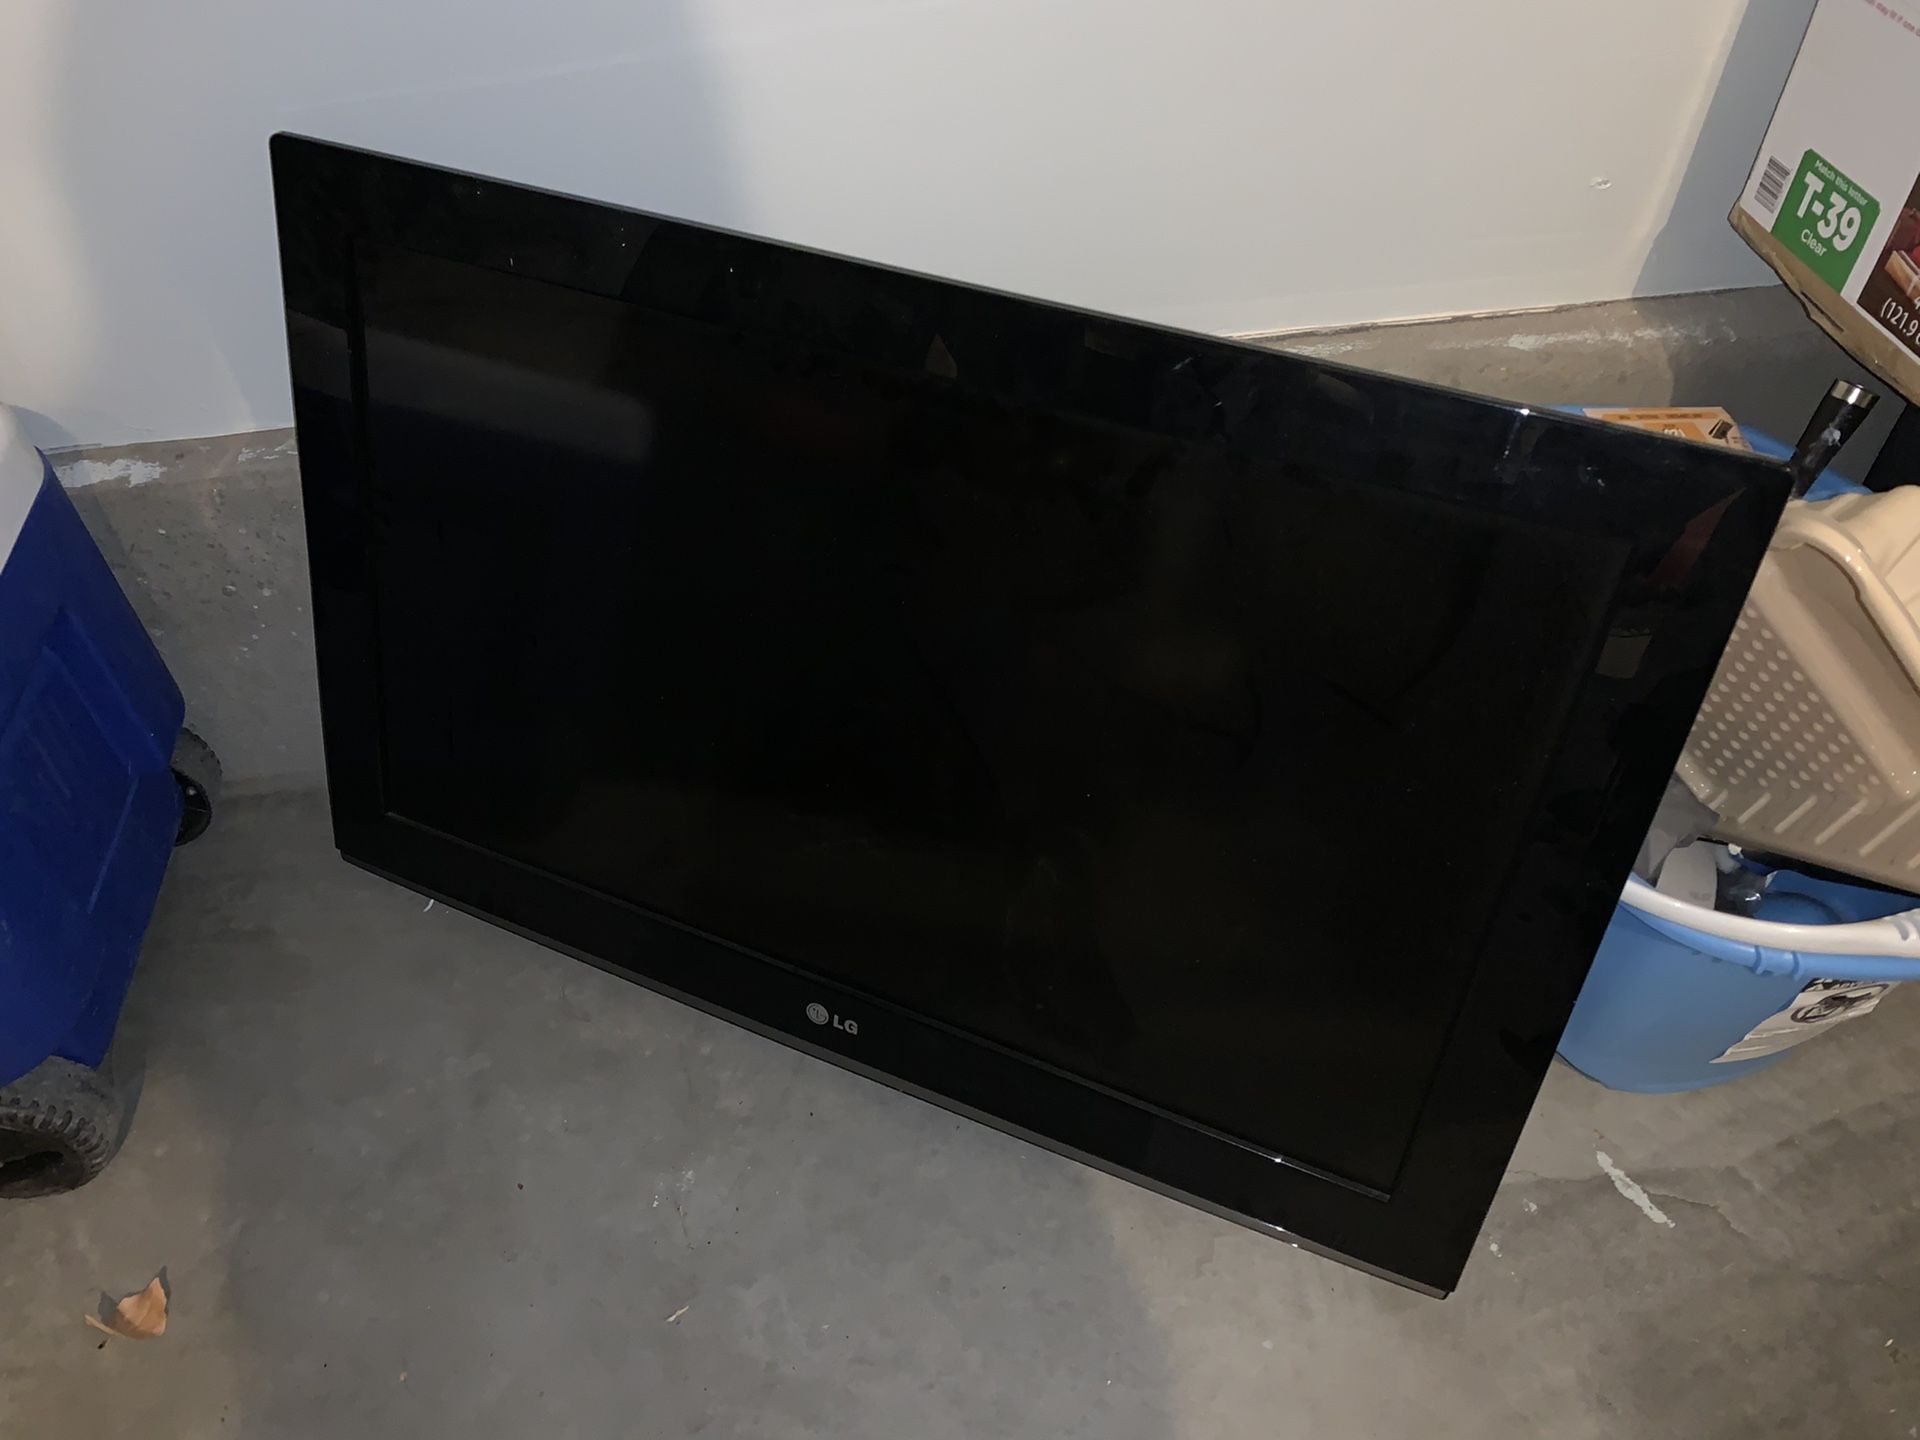 32inch LG model 32LD350 with wall mount